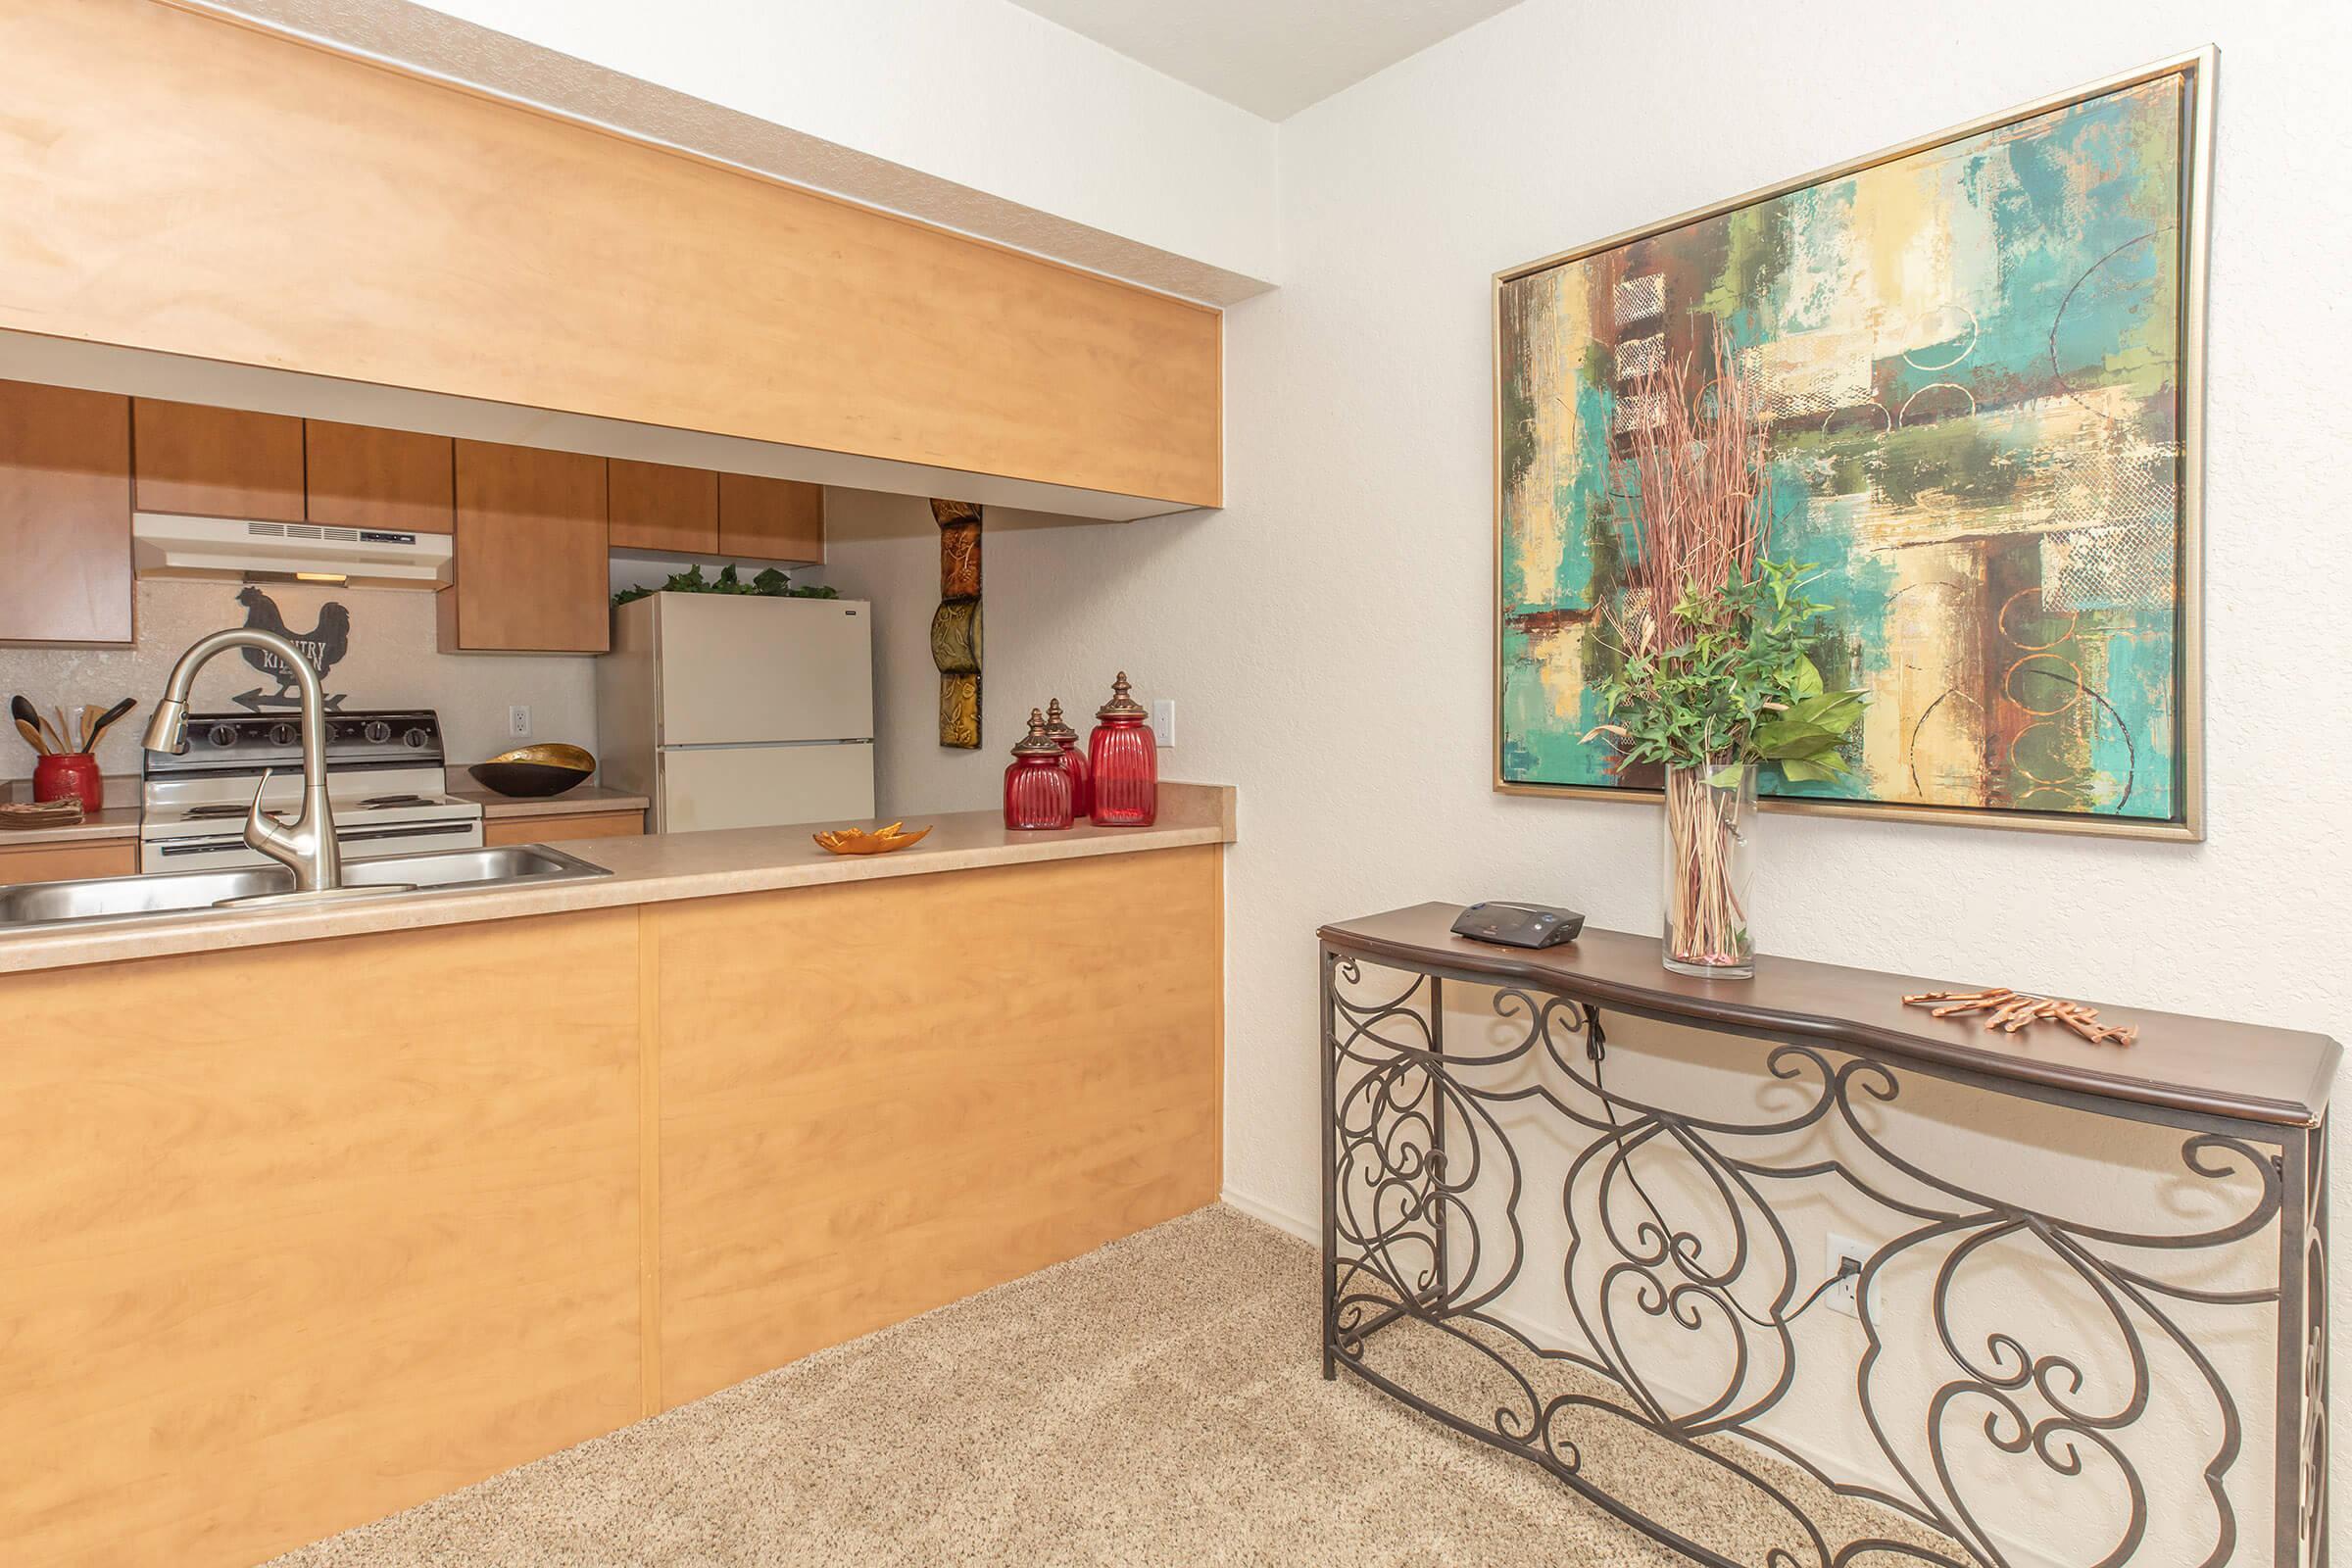 A VIEW OF THE BREAKFAST BAR IN SELECT HOMES